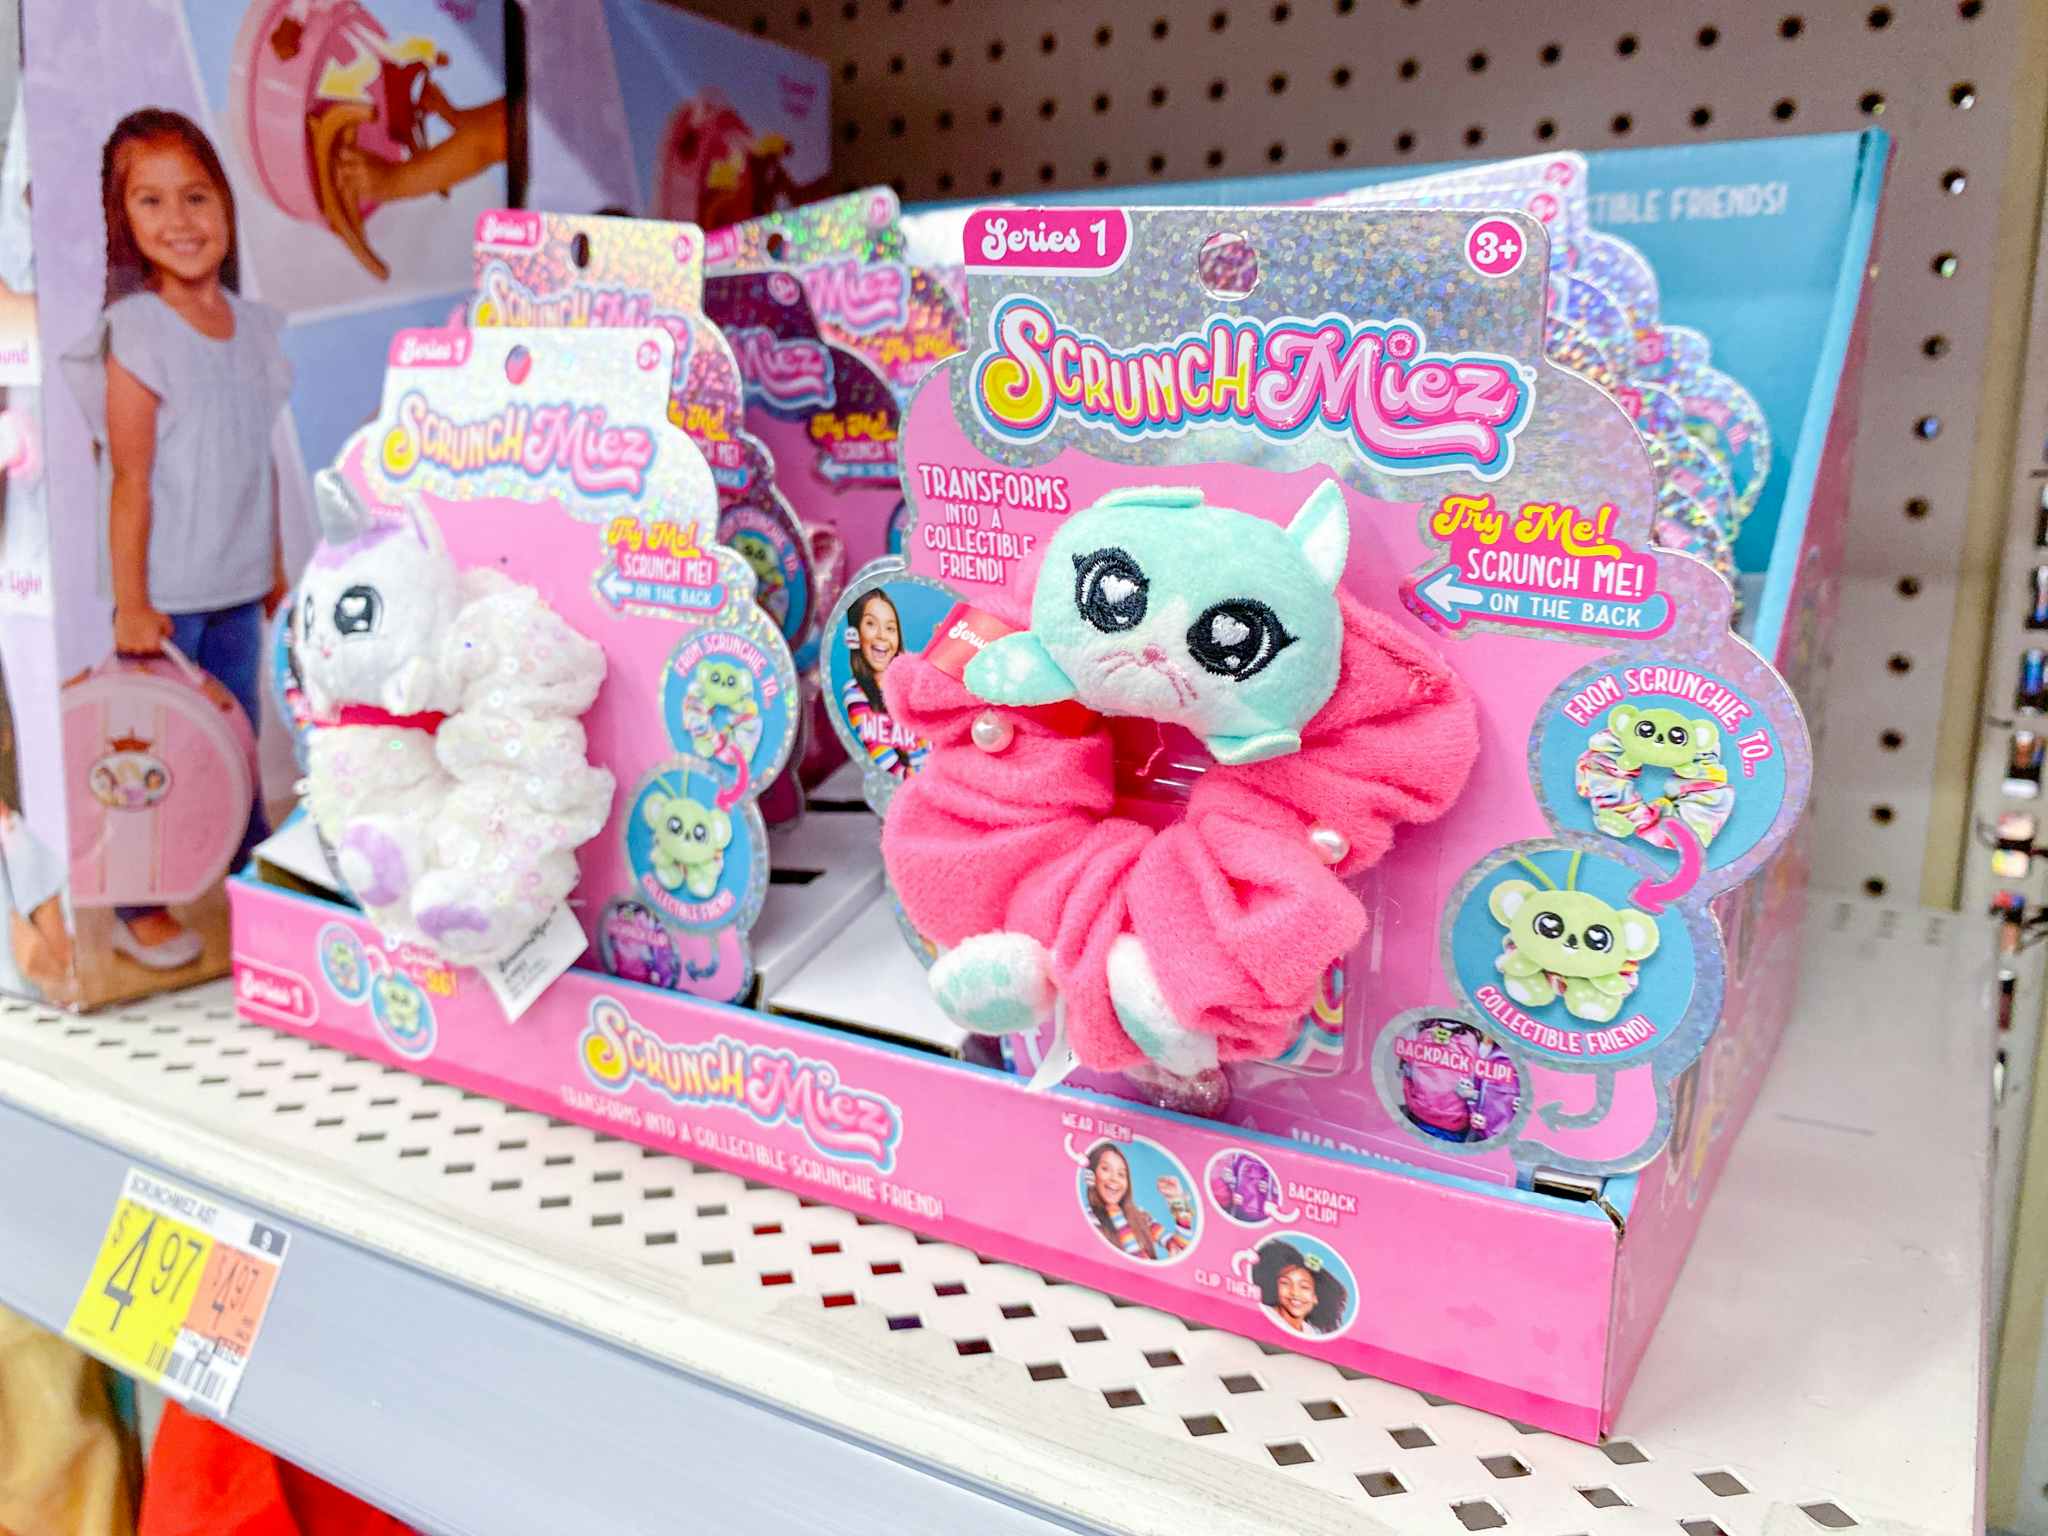 Will Sell Out: ScrunchMiez 4-Pack, Just $3.82 at Walmart (Reg. $19.99)